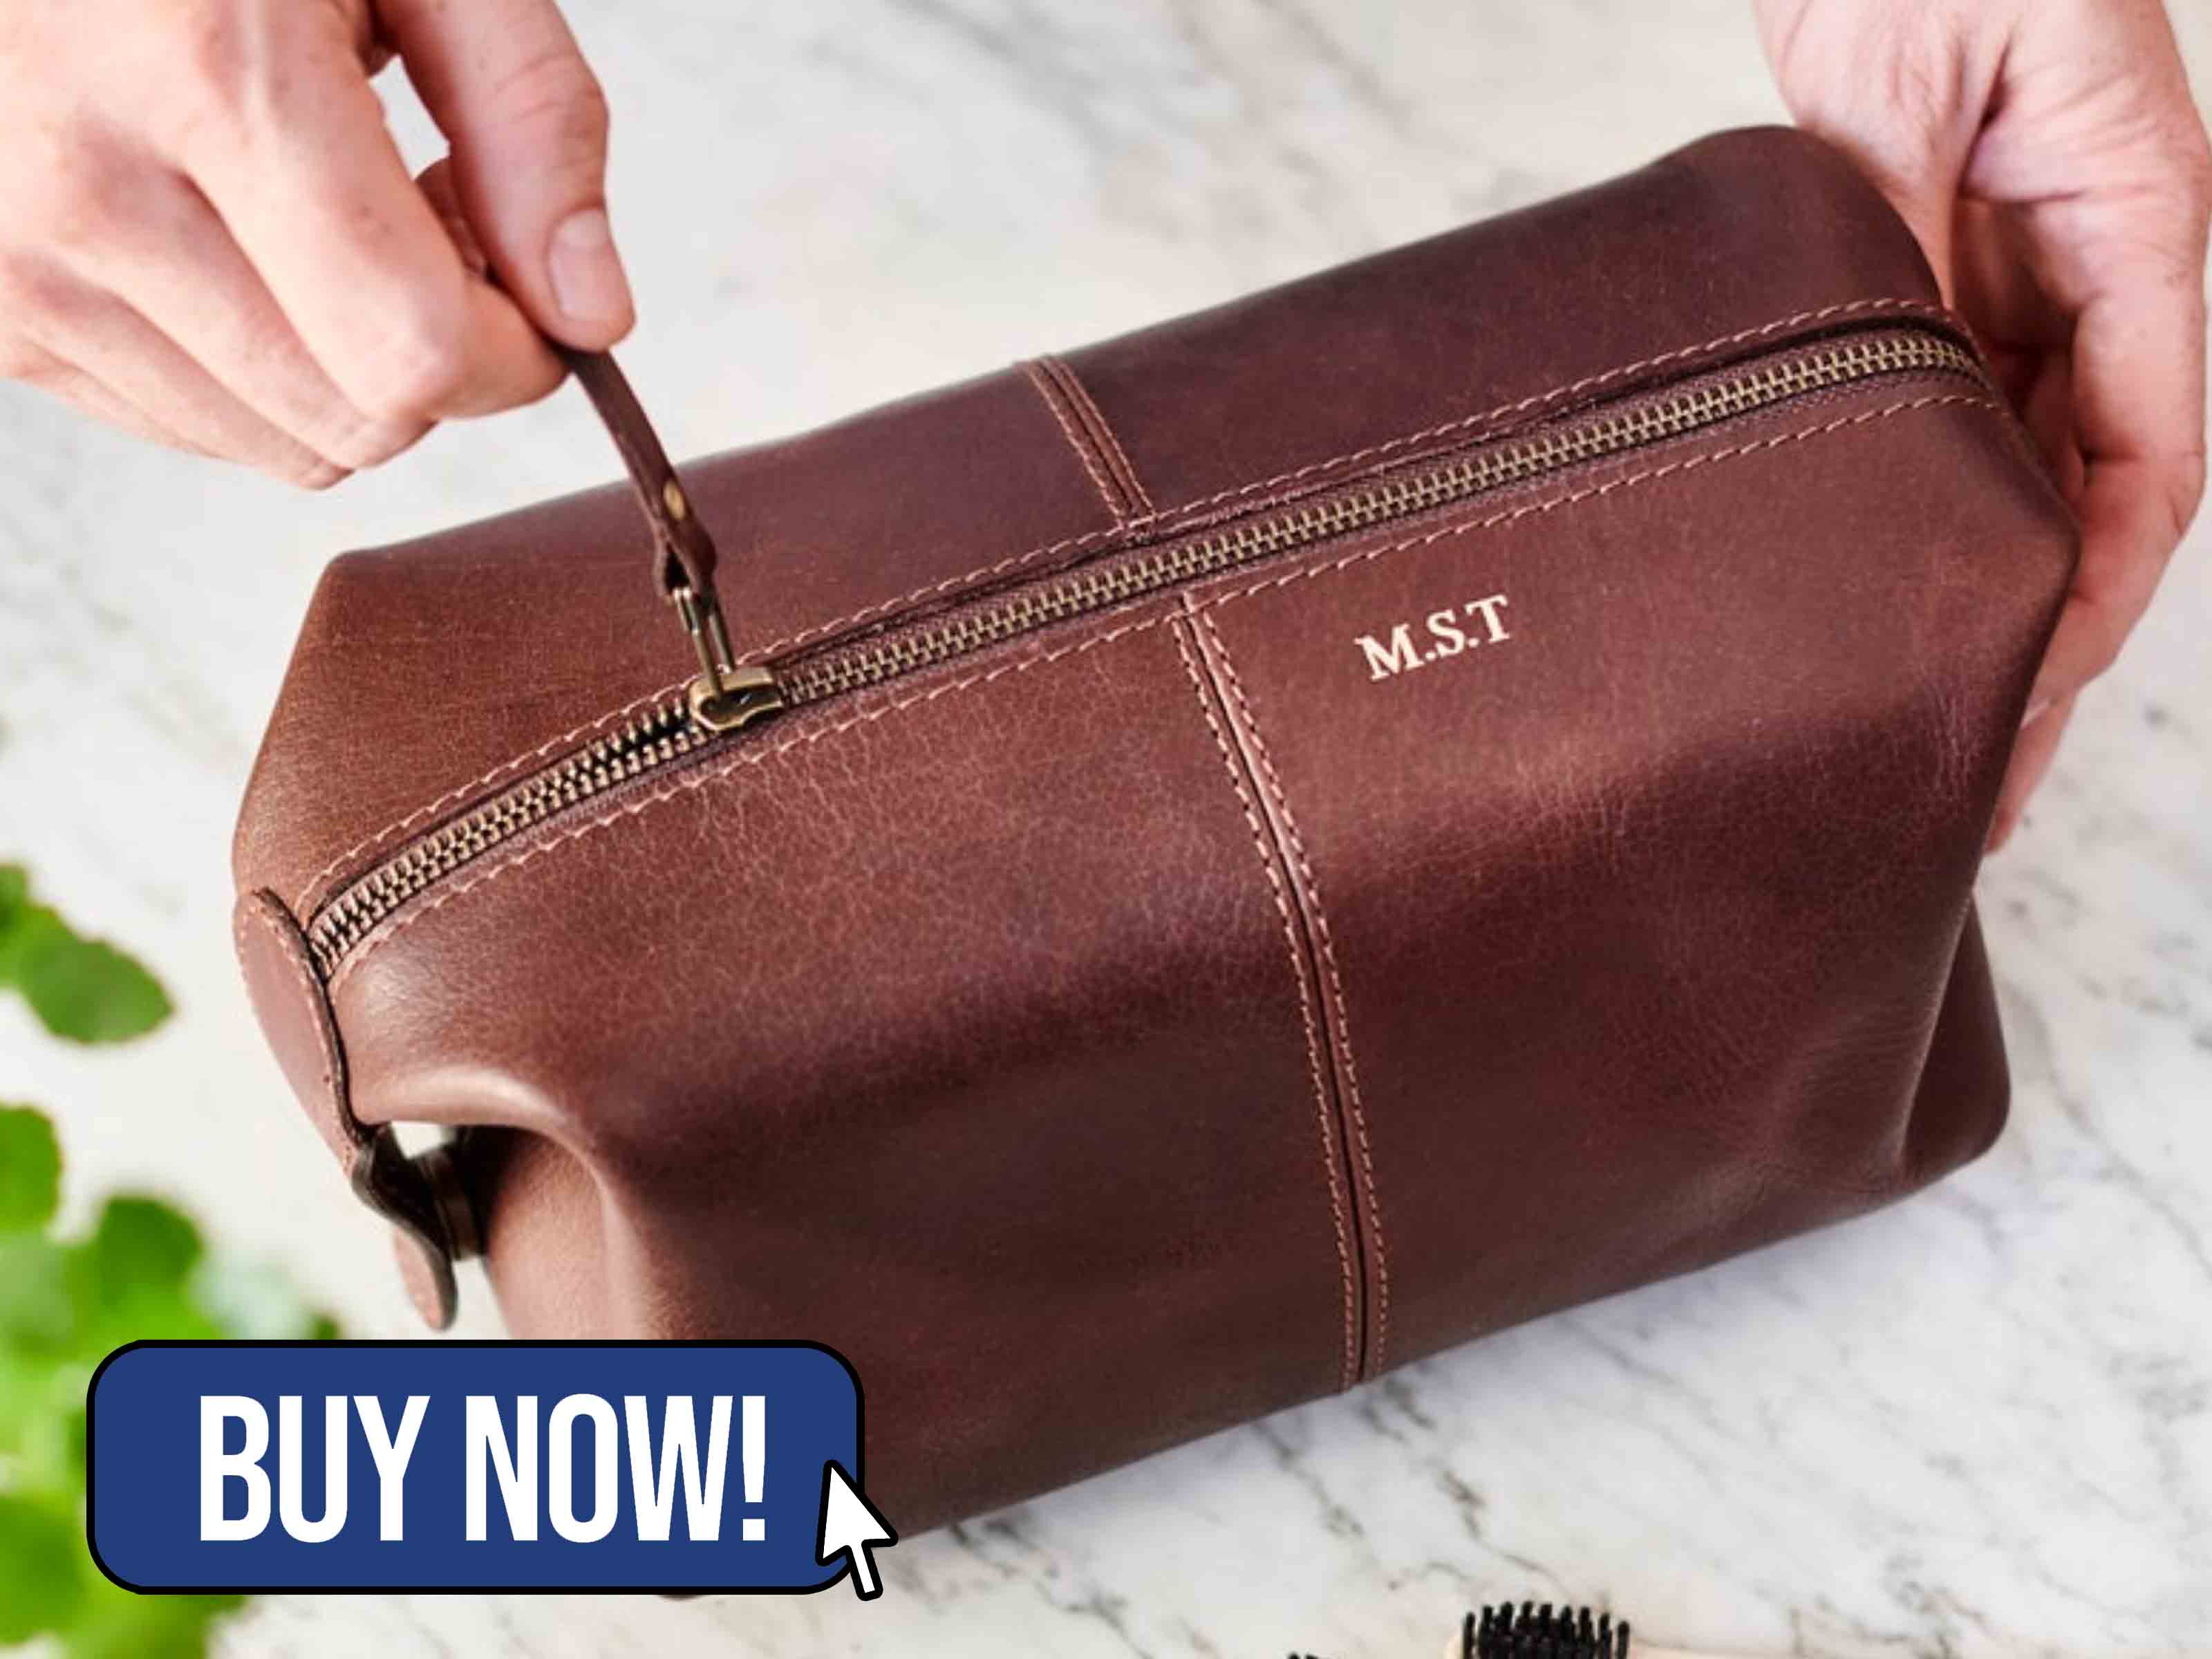 Leather Wash Bag with Personalisation - HerbertandWinifred